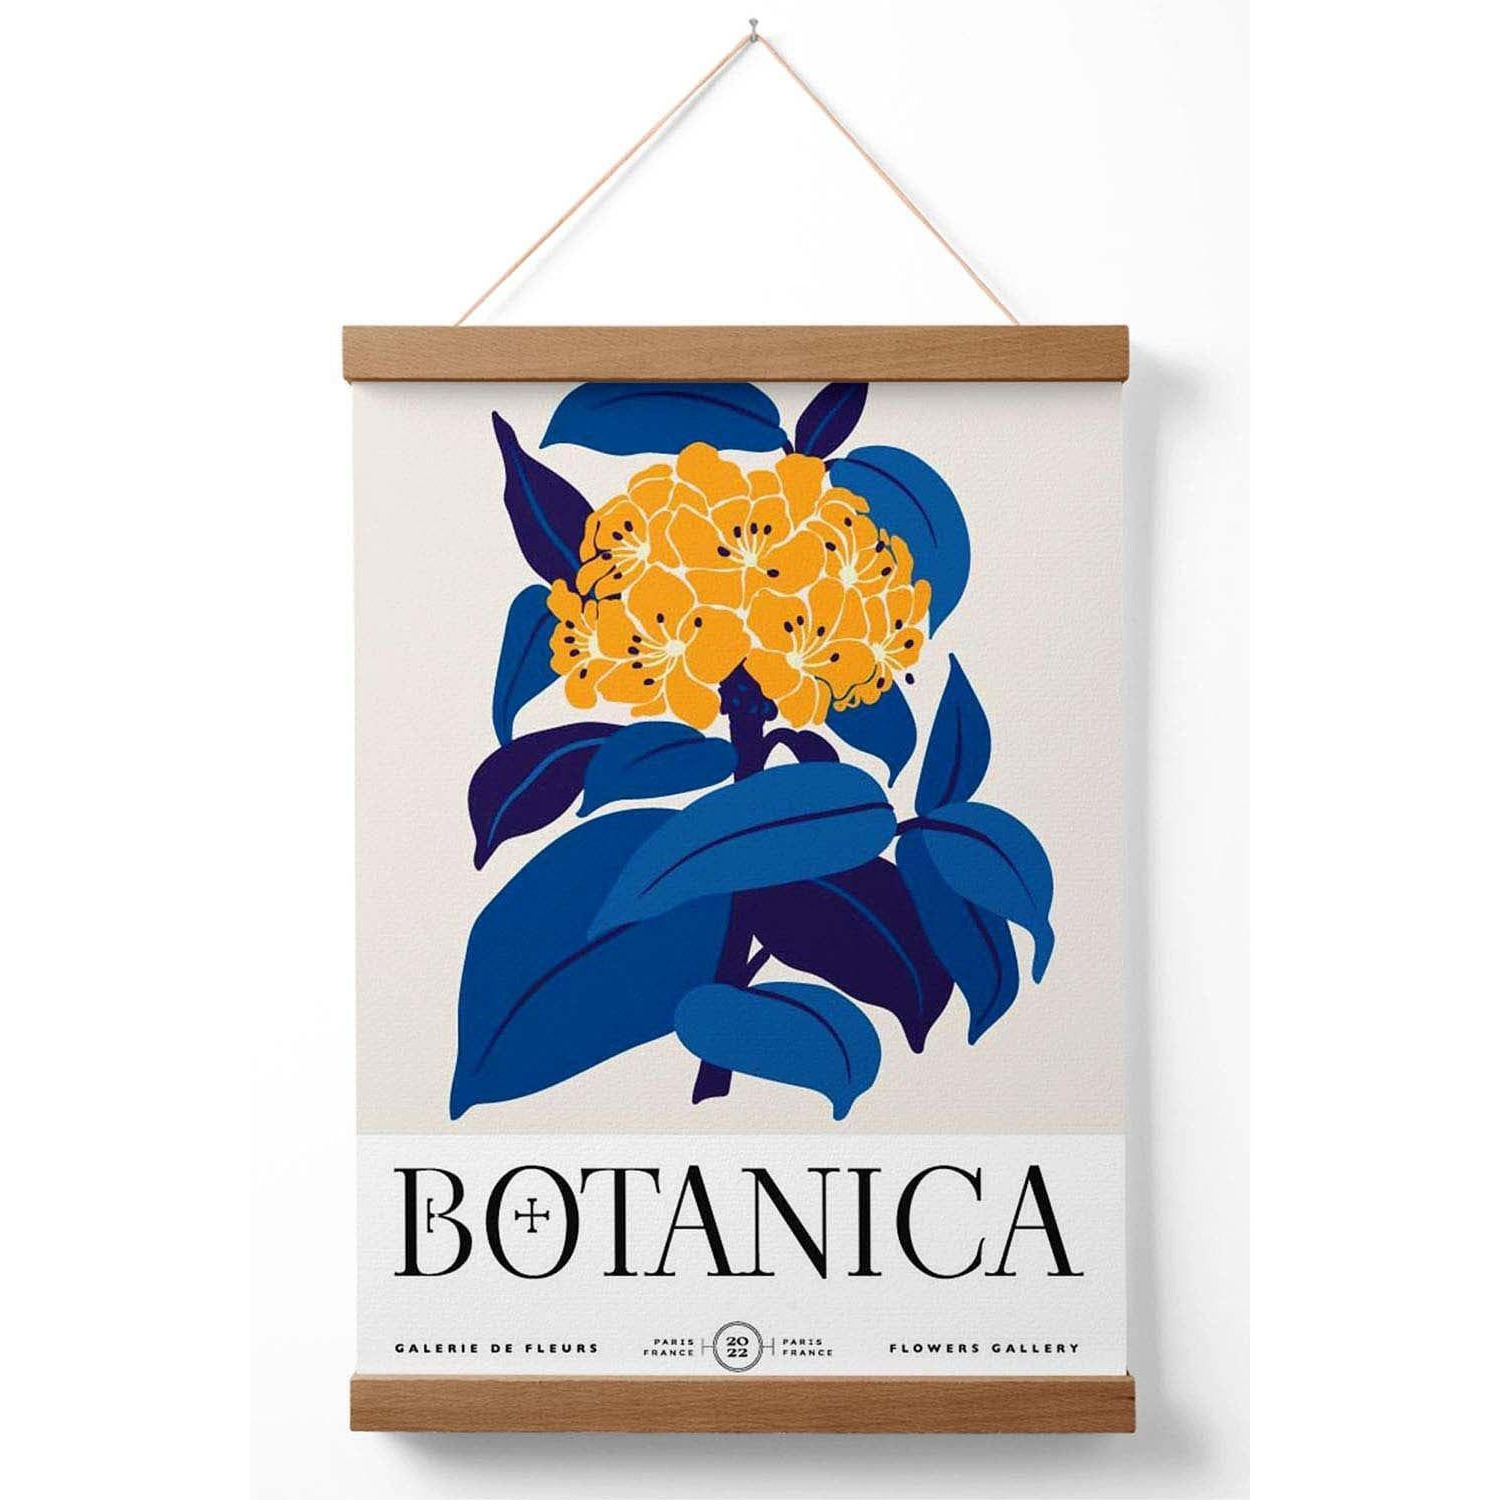 Yellow and Blue Hydrangea Flower Market Exhibition Poster with Oak Hanger - image 1